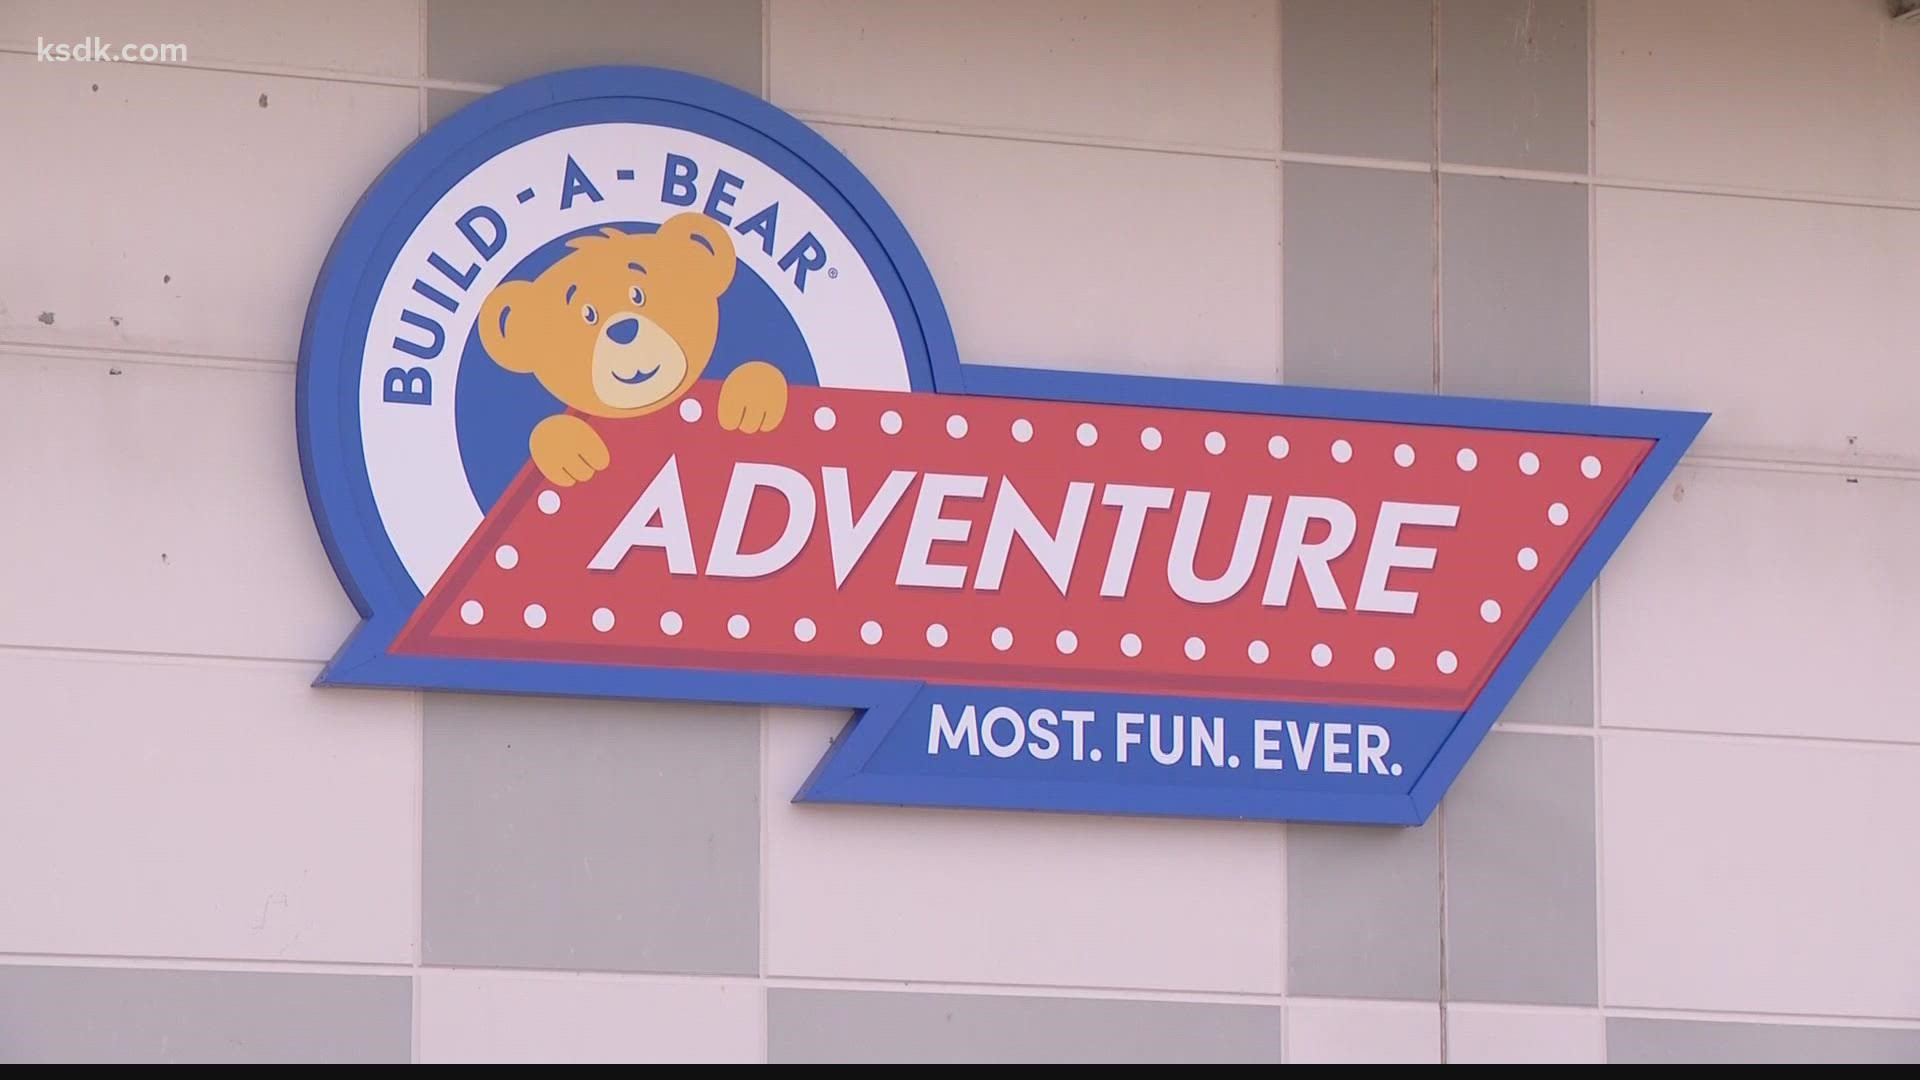 Build-A-Bear Workshop opening new concept in Chesterfield